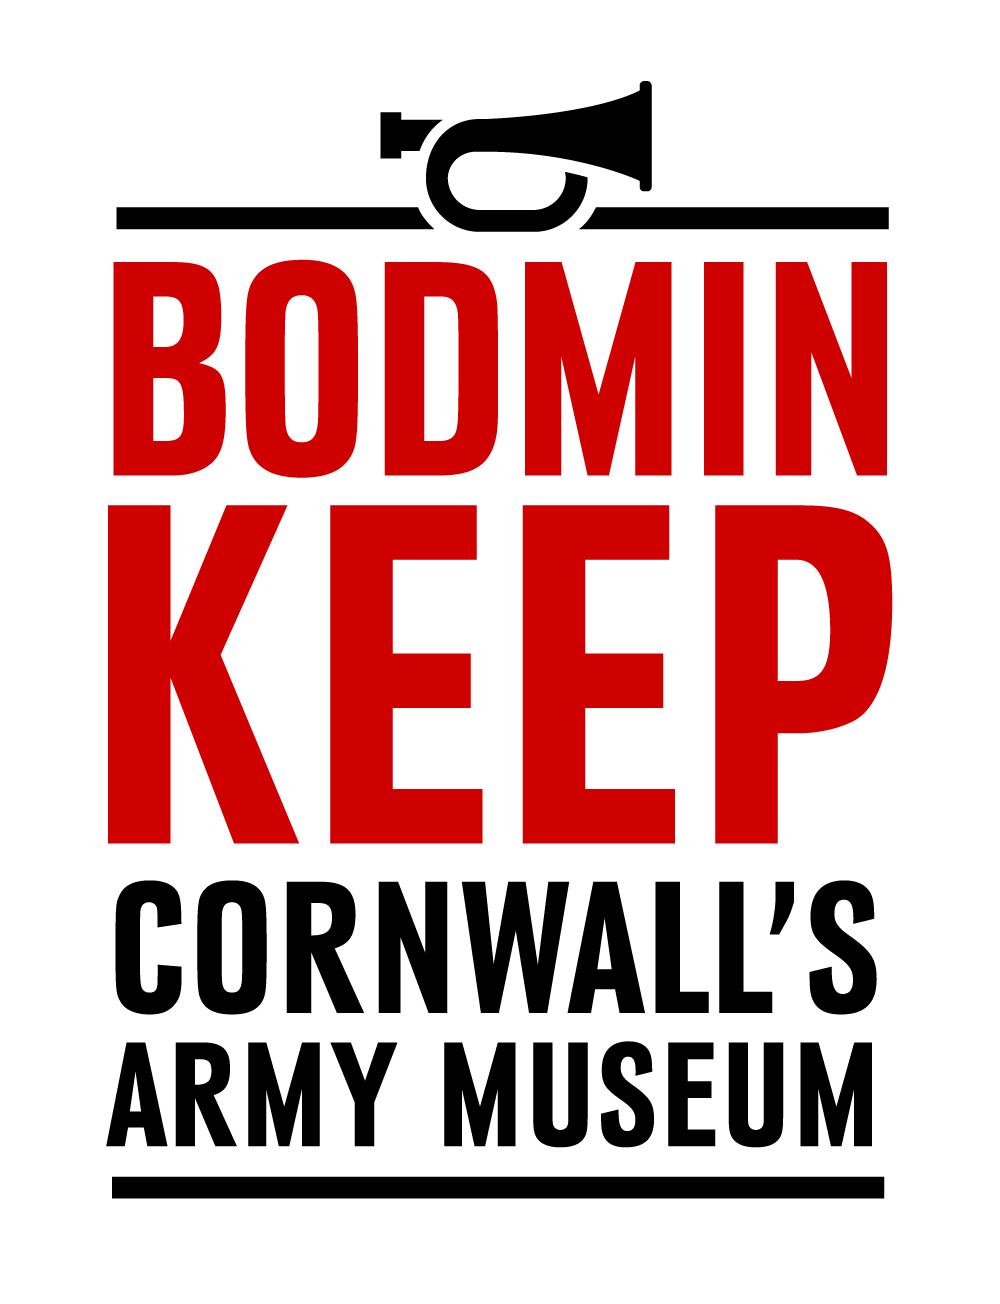 Image of museum logo made up of a black bugle with Bodmin Keep written in red below. Below this is Cornwall's Army Museum in black below